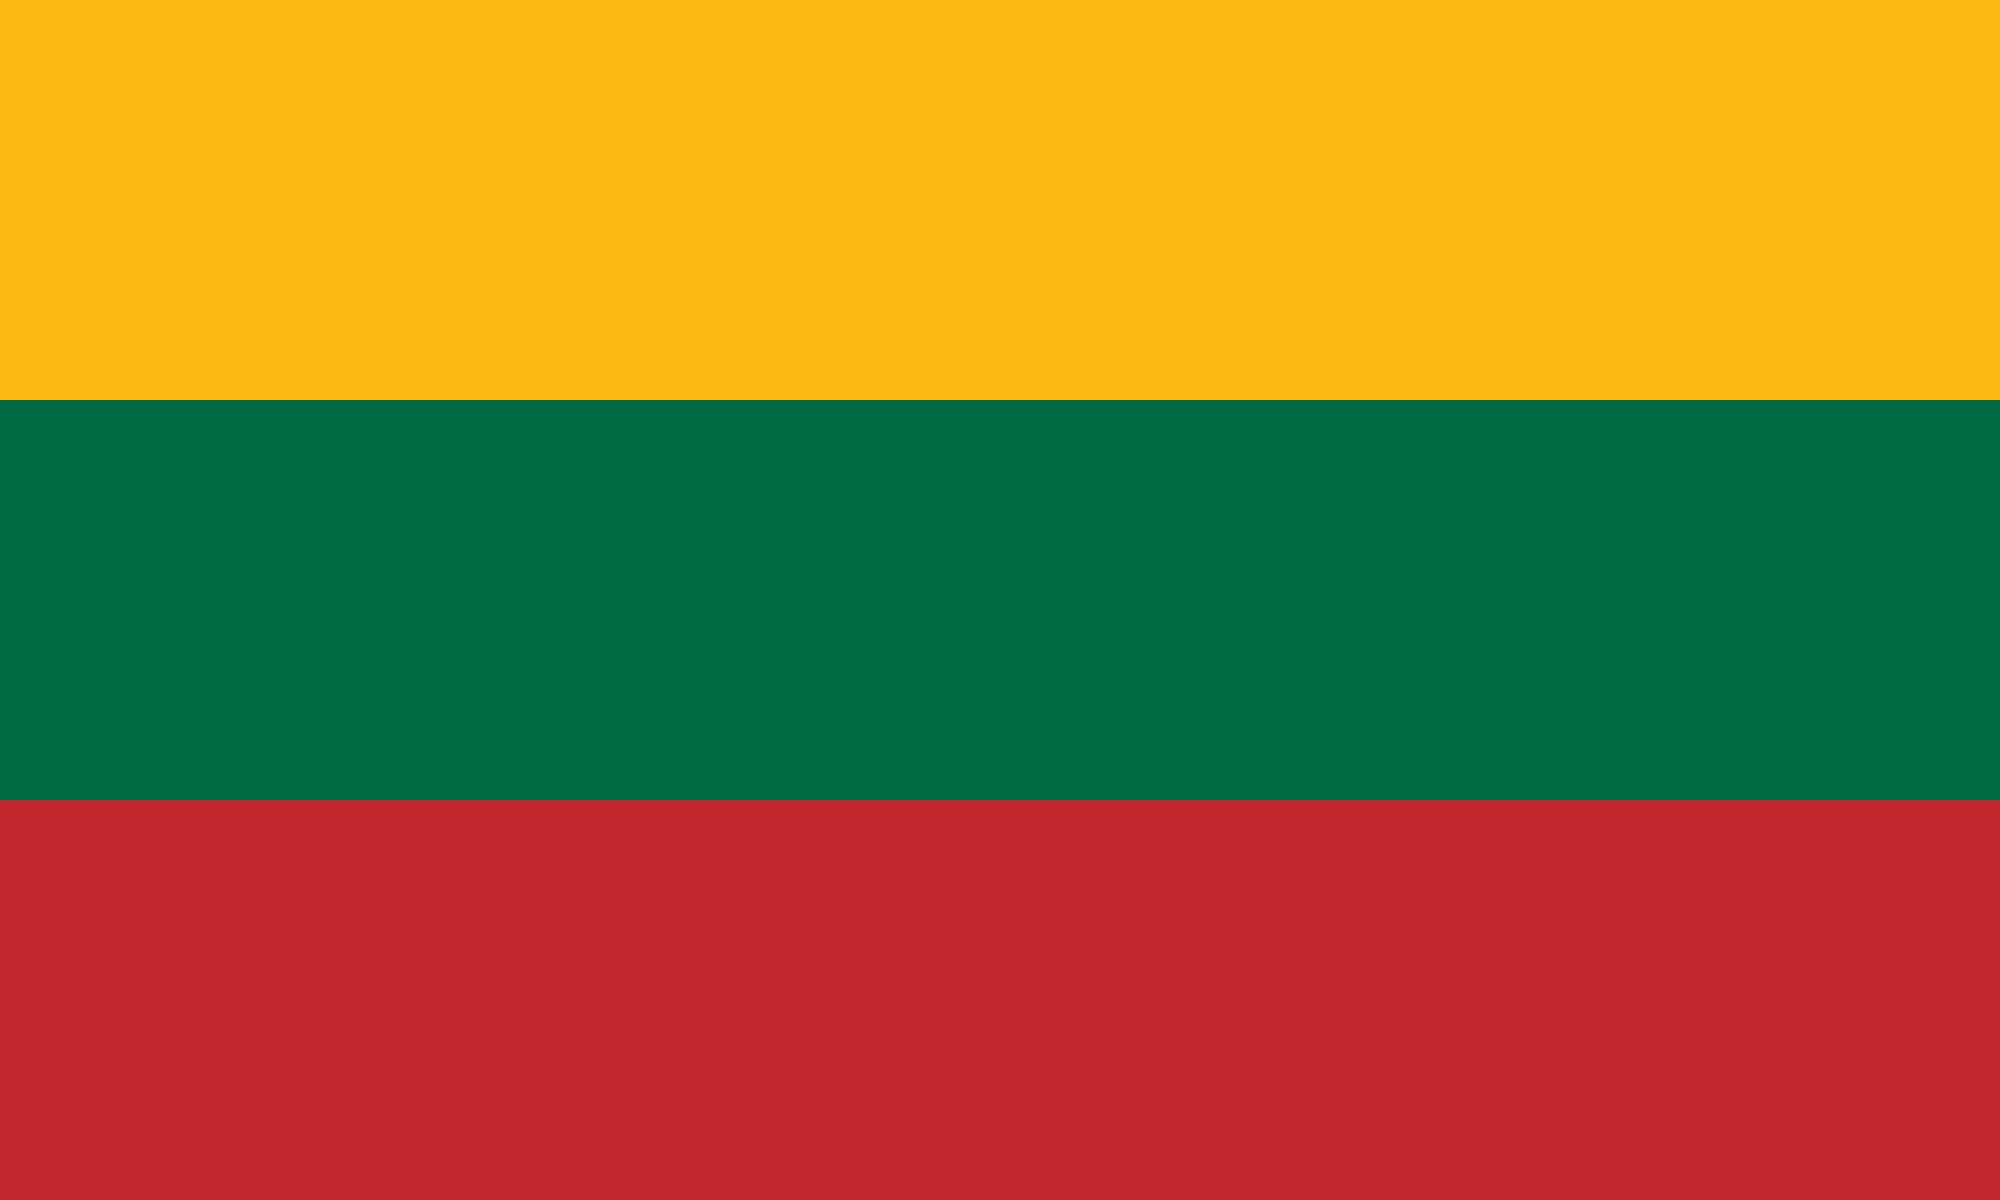 inside-new-russia-former-republics-lithuania